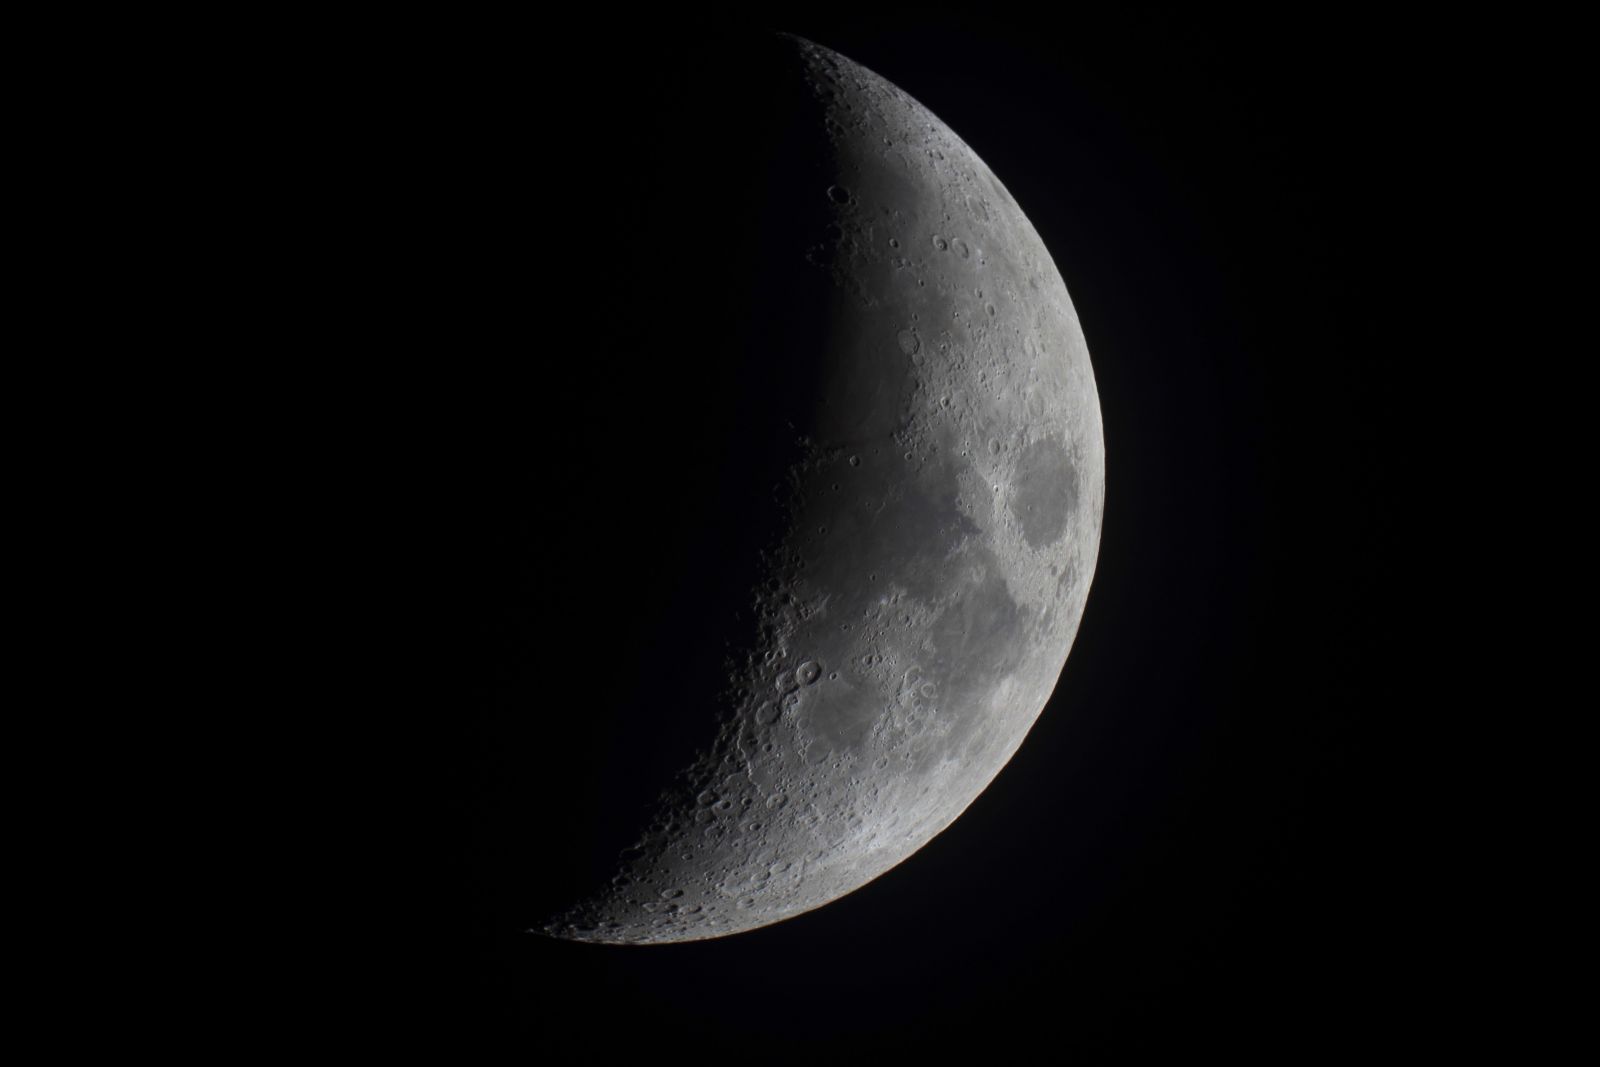 Moon images